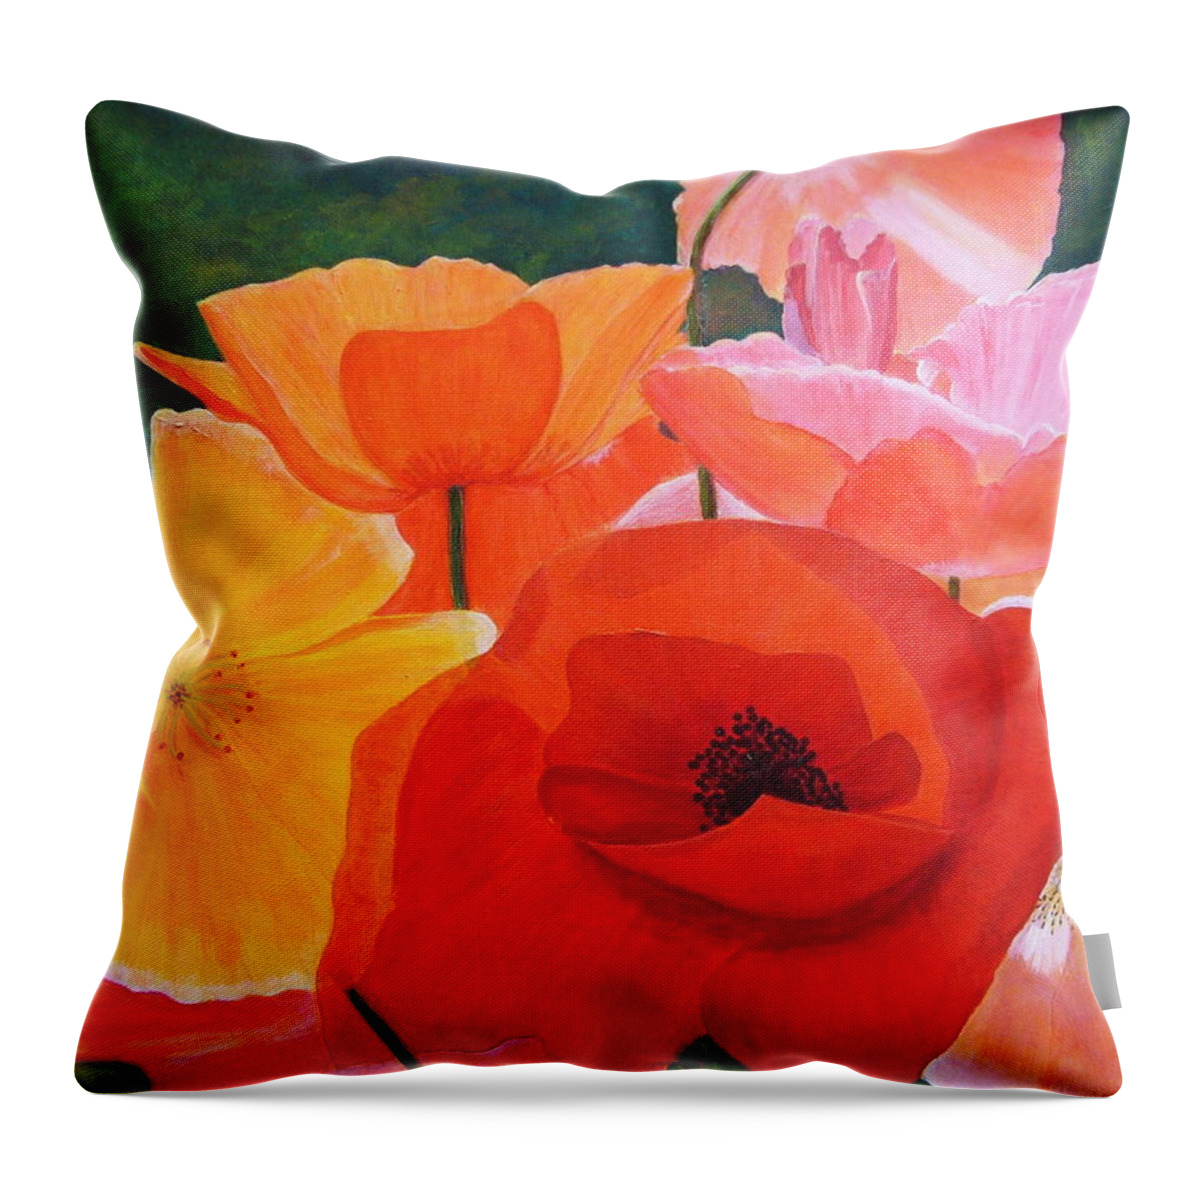 Flowers Throw Pillow featuring the painting Poppy Splendor by Lynda Evans